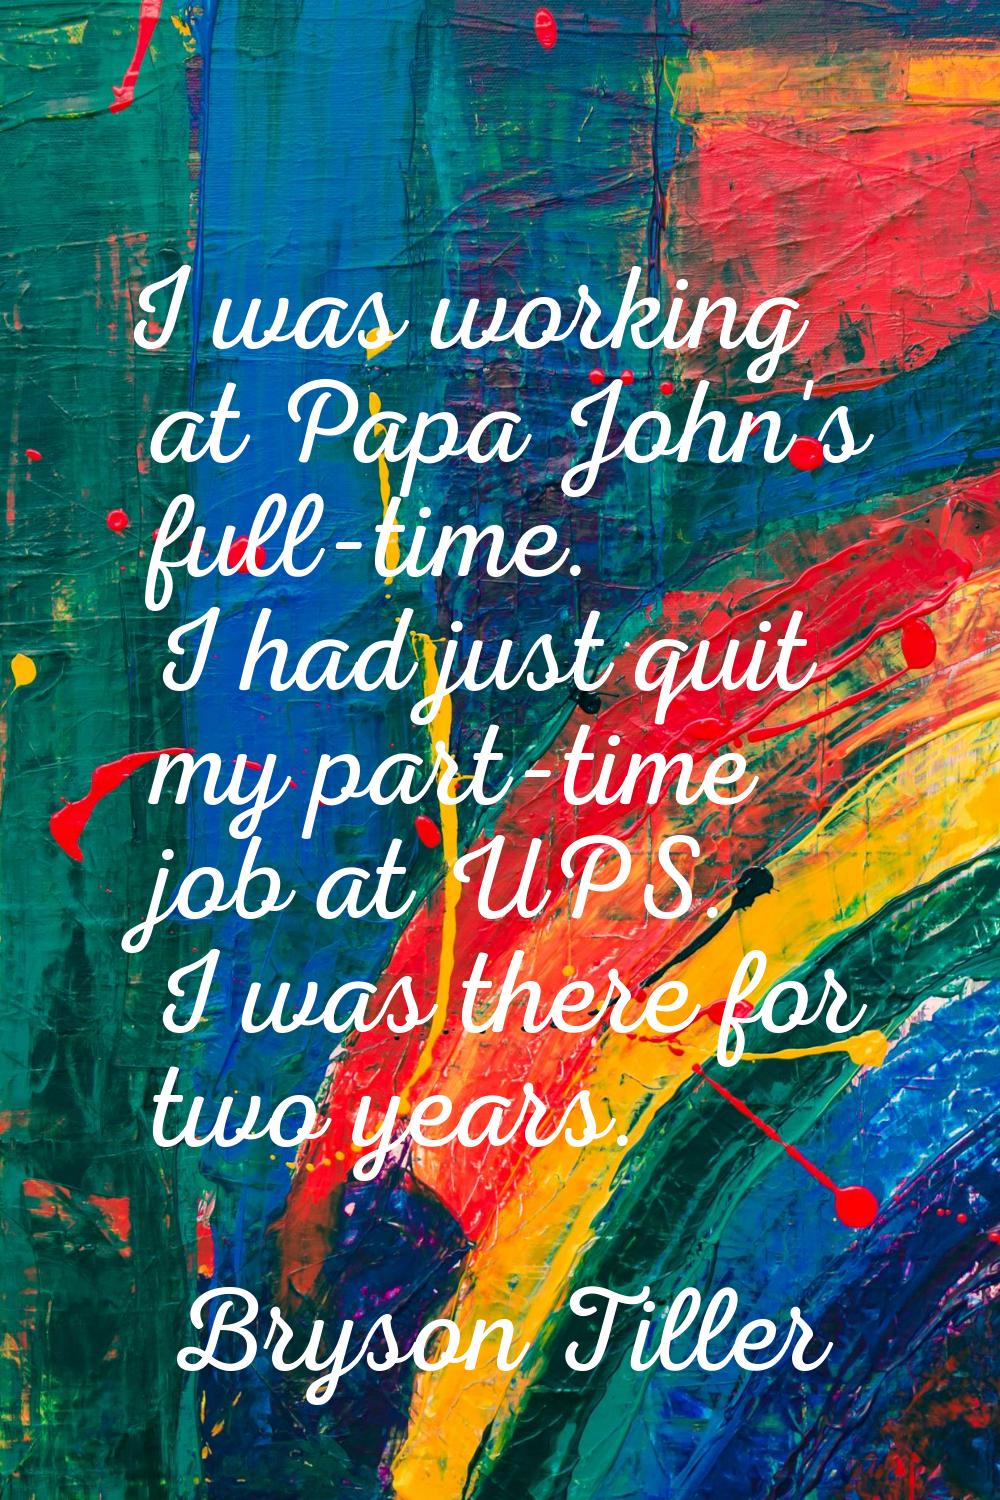 I was working at Papa John's full-time. I had just quit my part-time job at UPS. I was there for tw